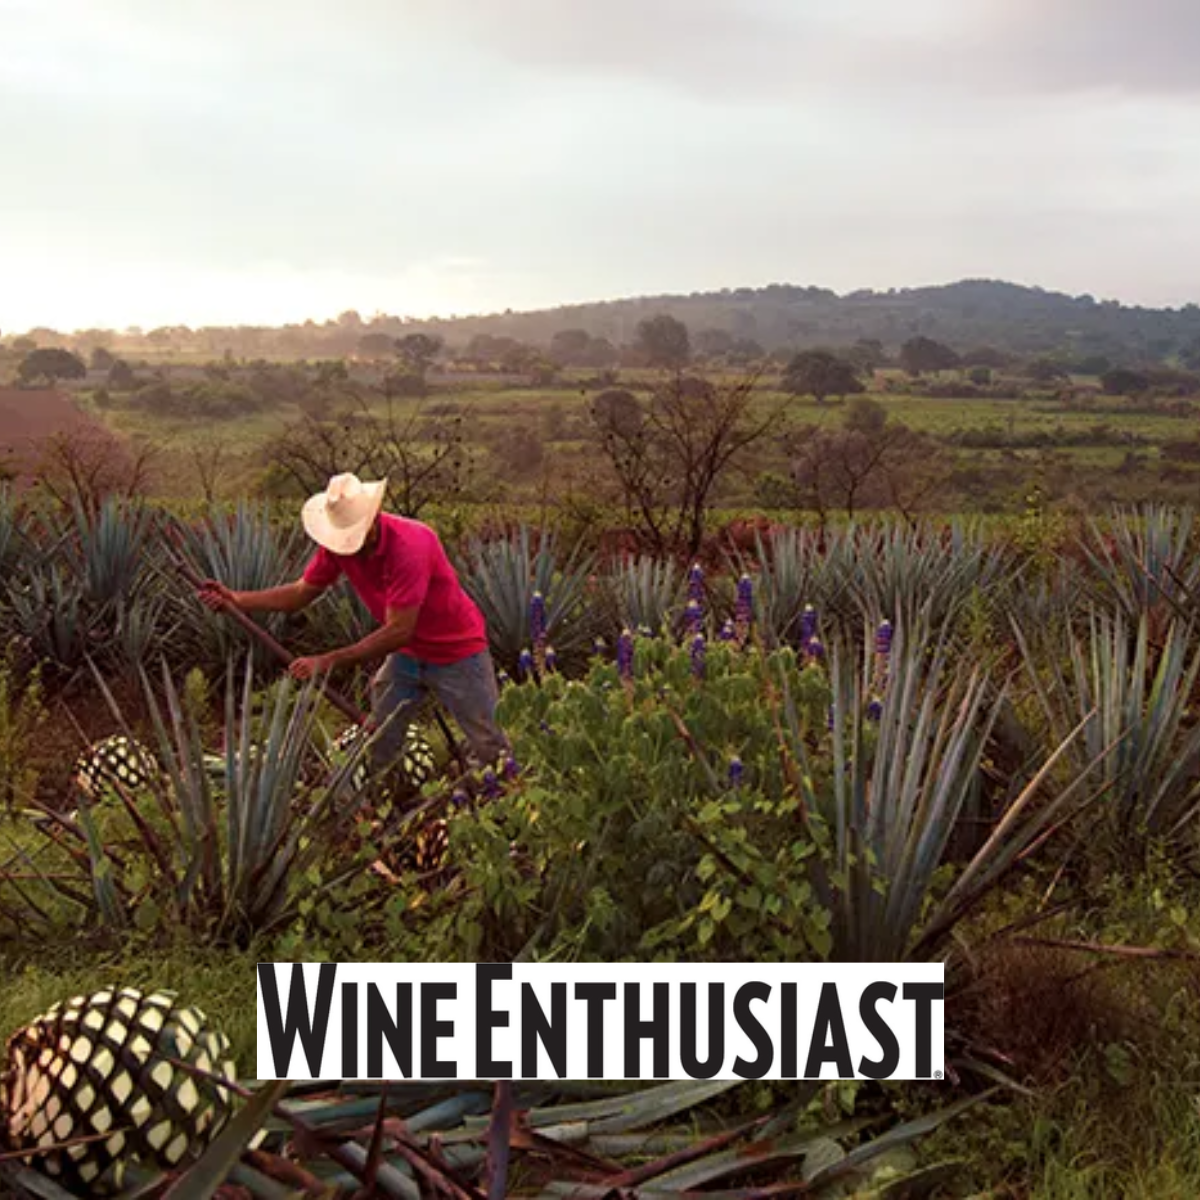 WINE ENTHUSIAST - Traveling Down the Tequila Trail